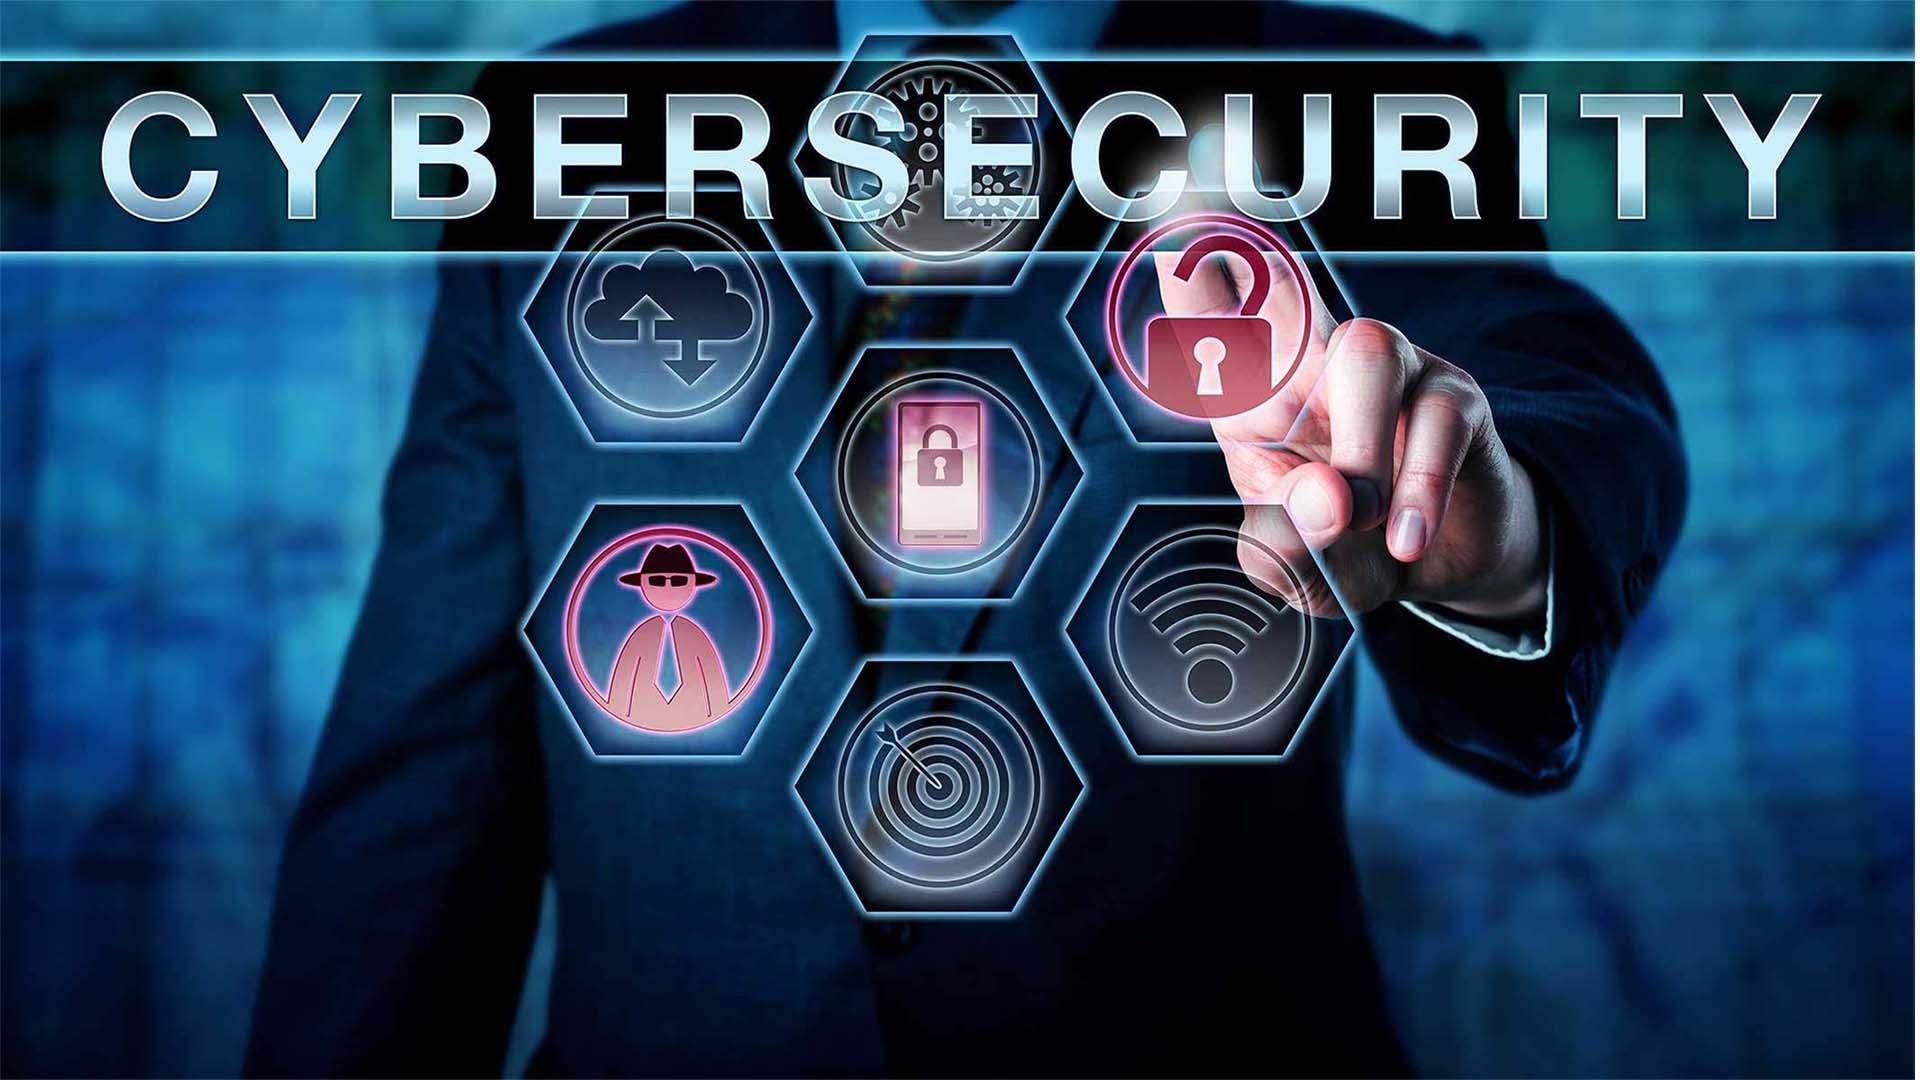 Network Security One Source for all your IT needs